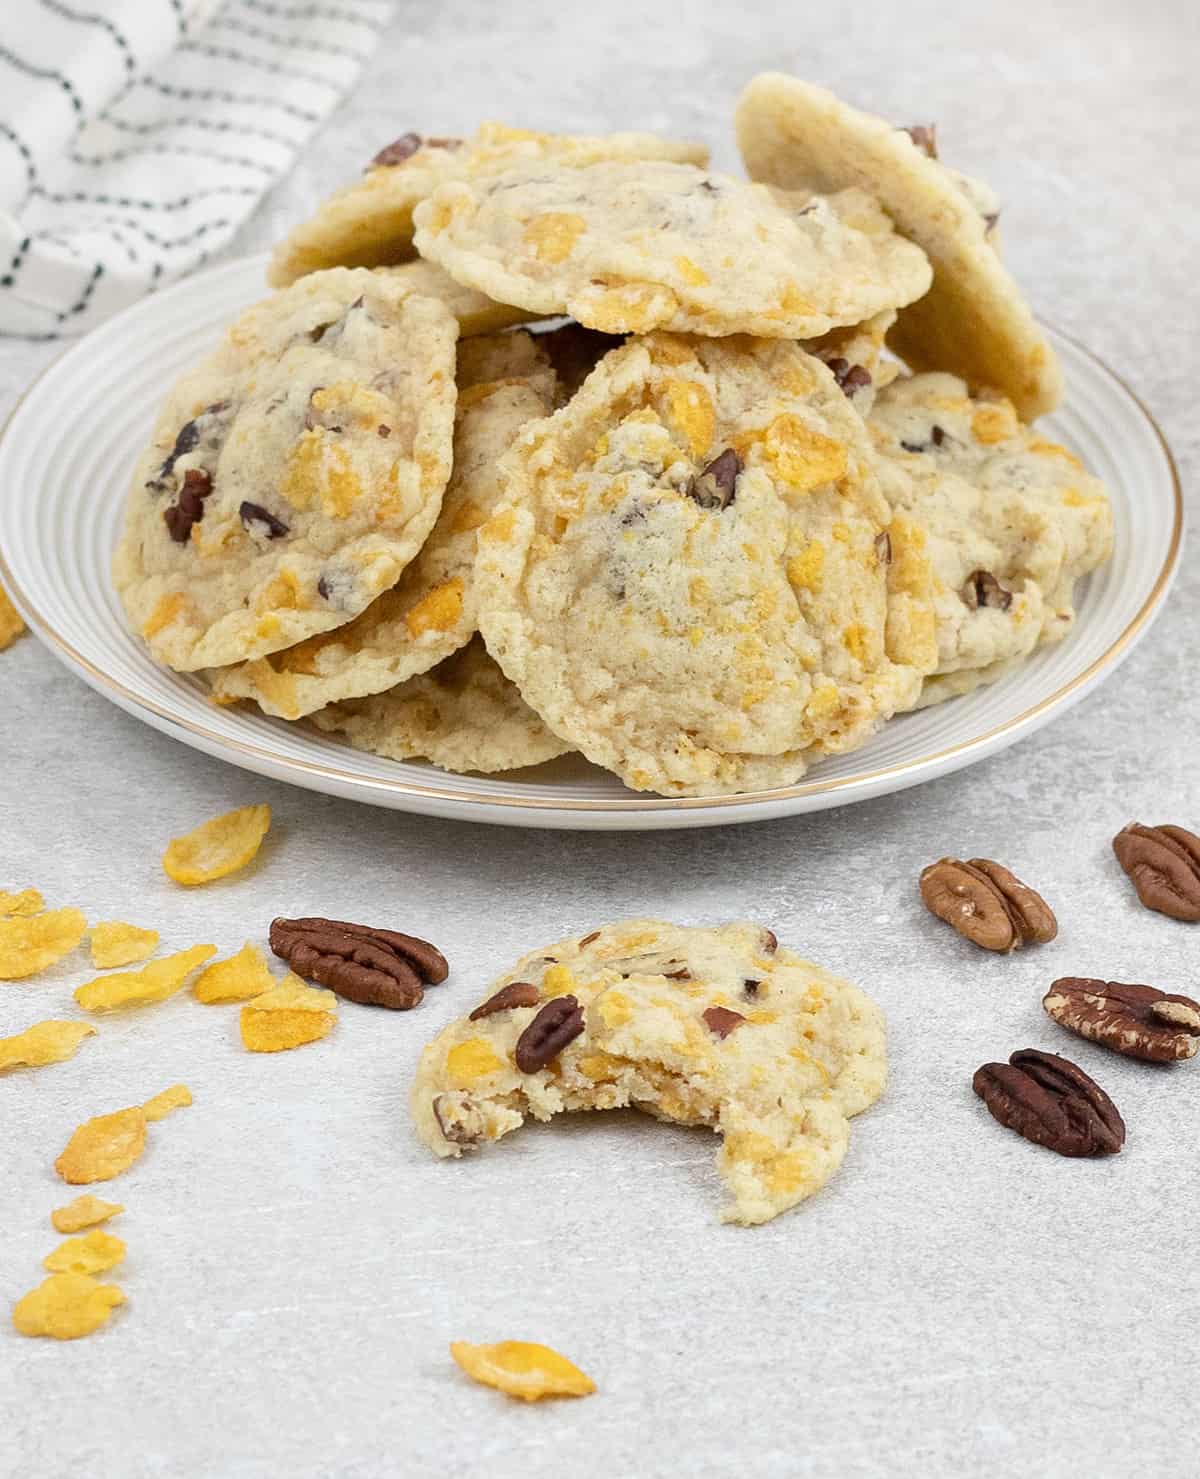 Homemade Butter Crunch Cookies With Corn flakes